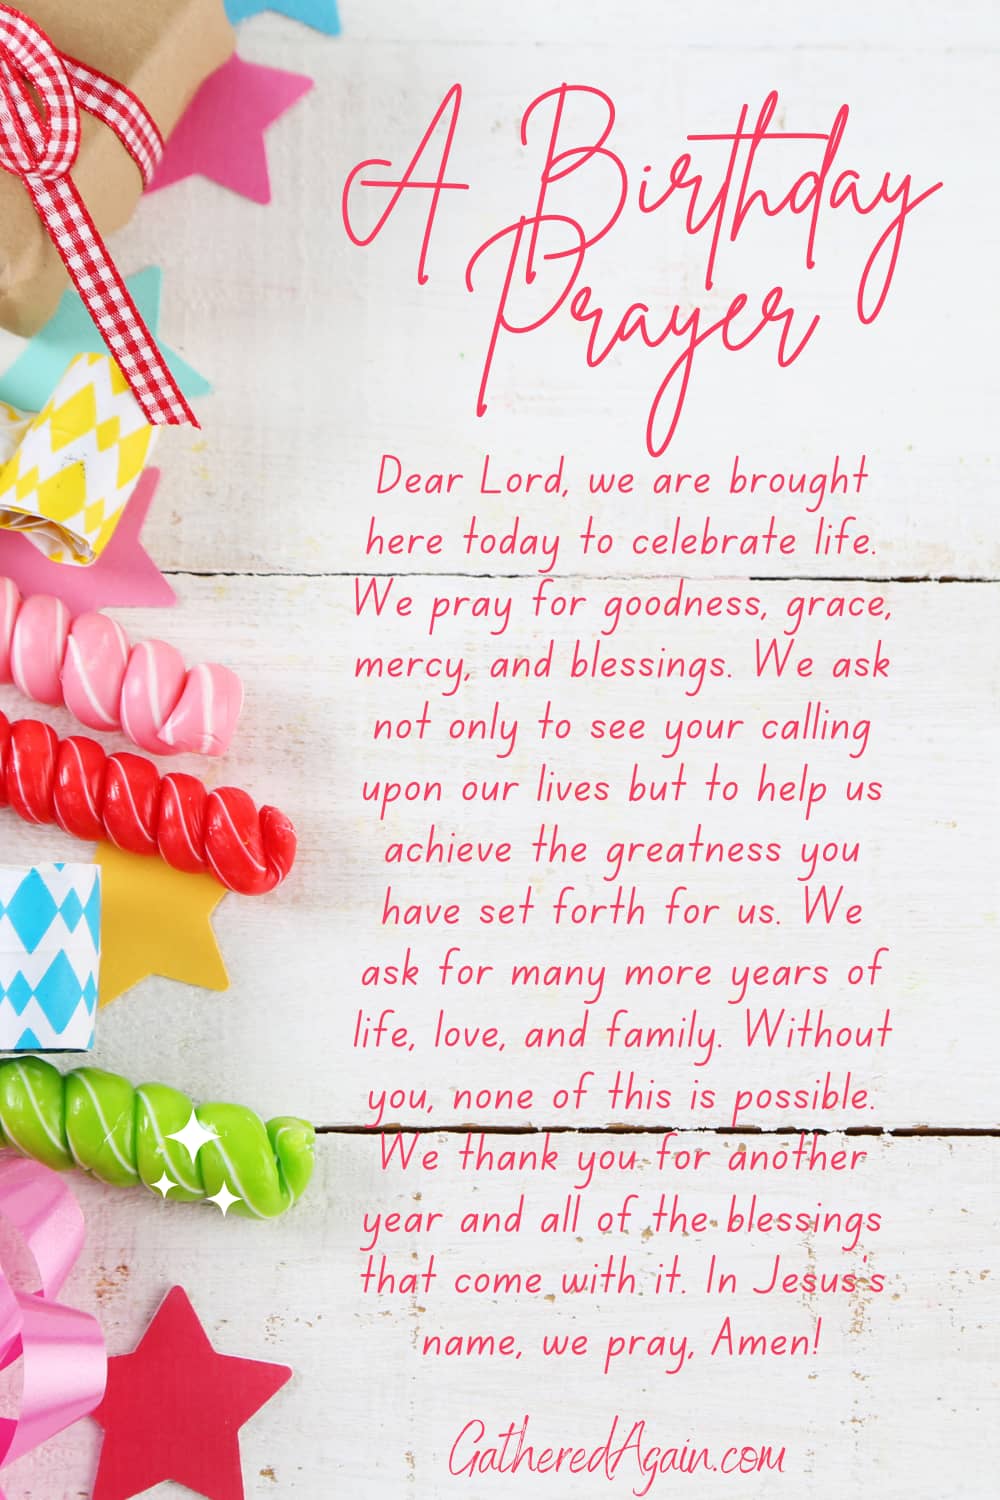 What to Say in an Opening Prayer for a Birthday Party